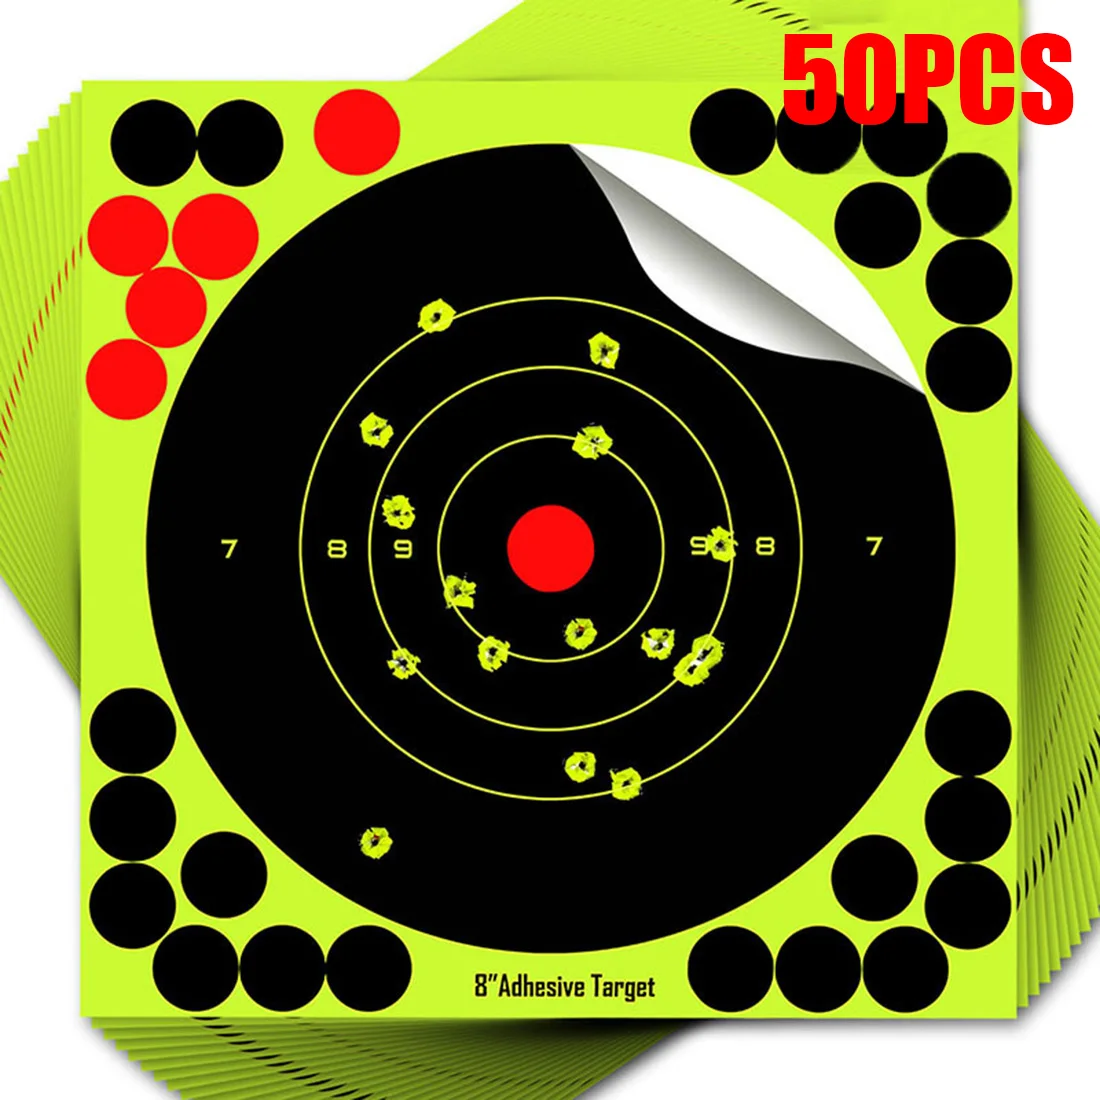 50pcs Splatter Flower Objective Colorful 8-Inch Targets Stickers 2020 Hot Sale Shoot Target Adhesive Reactivity Aim Shoot Target enlarge